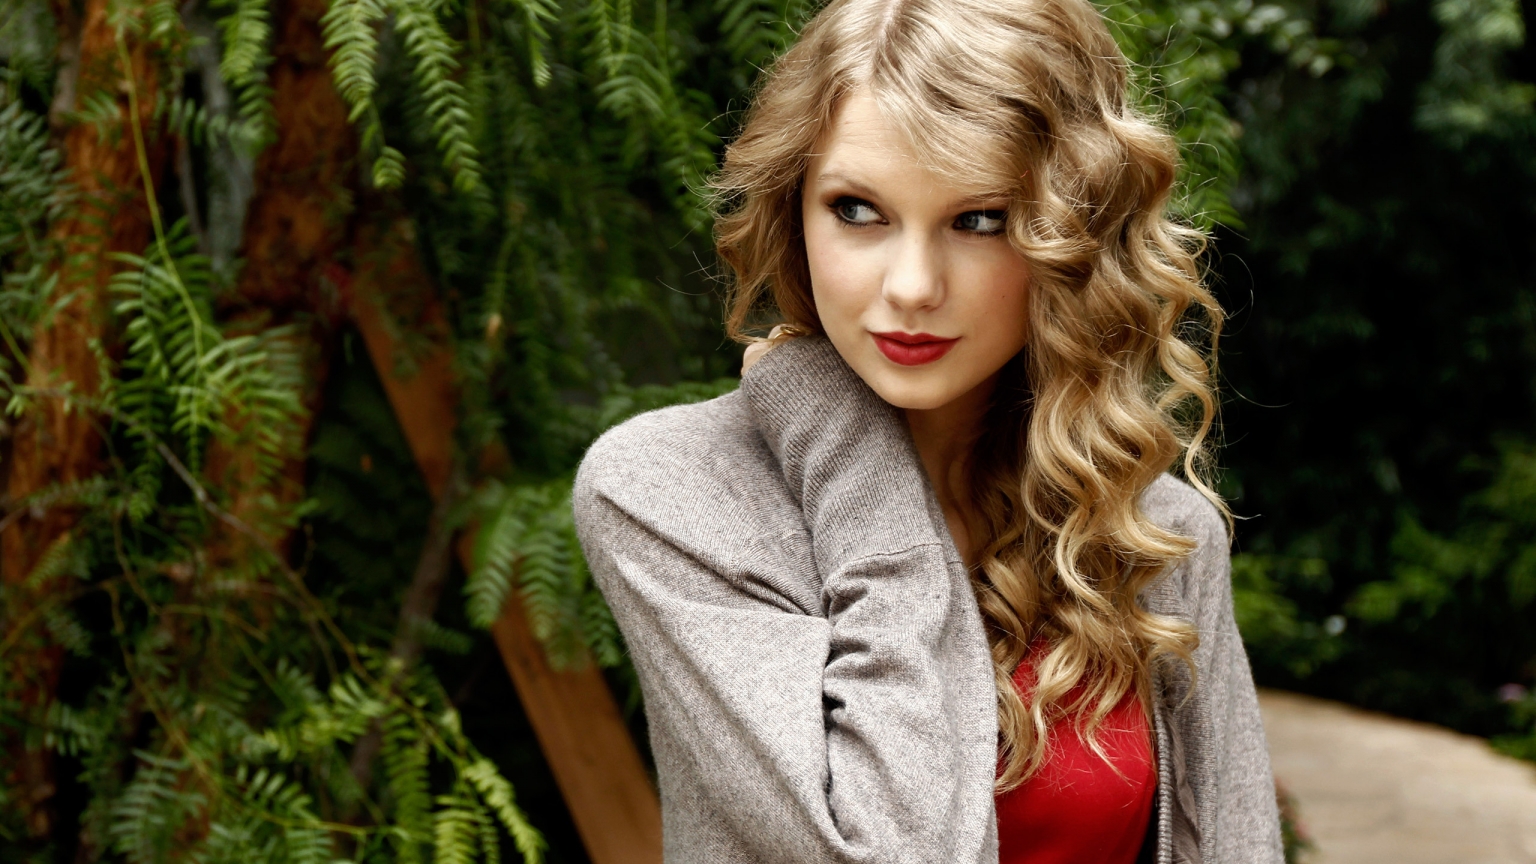 Smiling Taylor Swift Actress for 1536 x 864 HDTV resolution